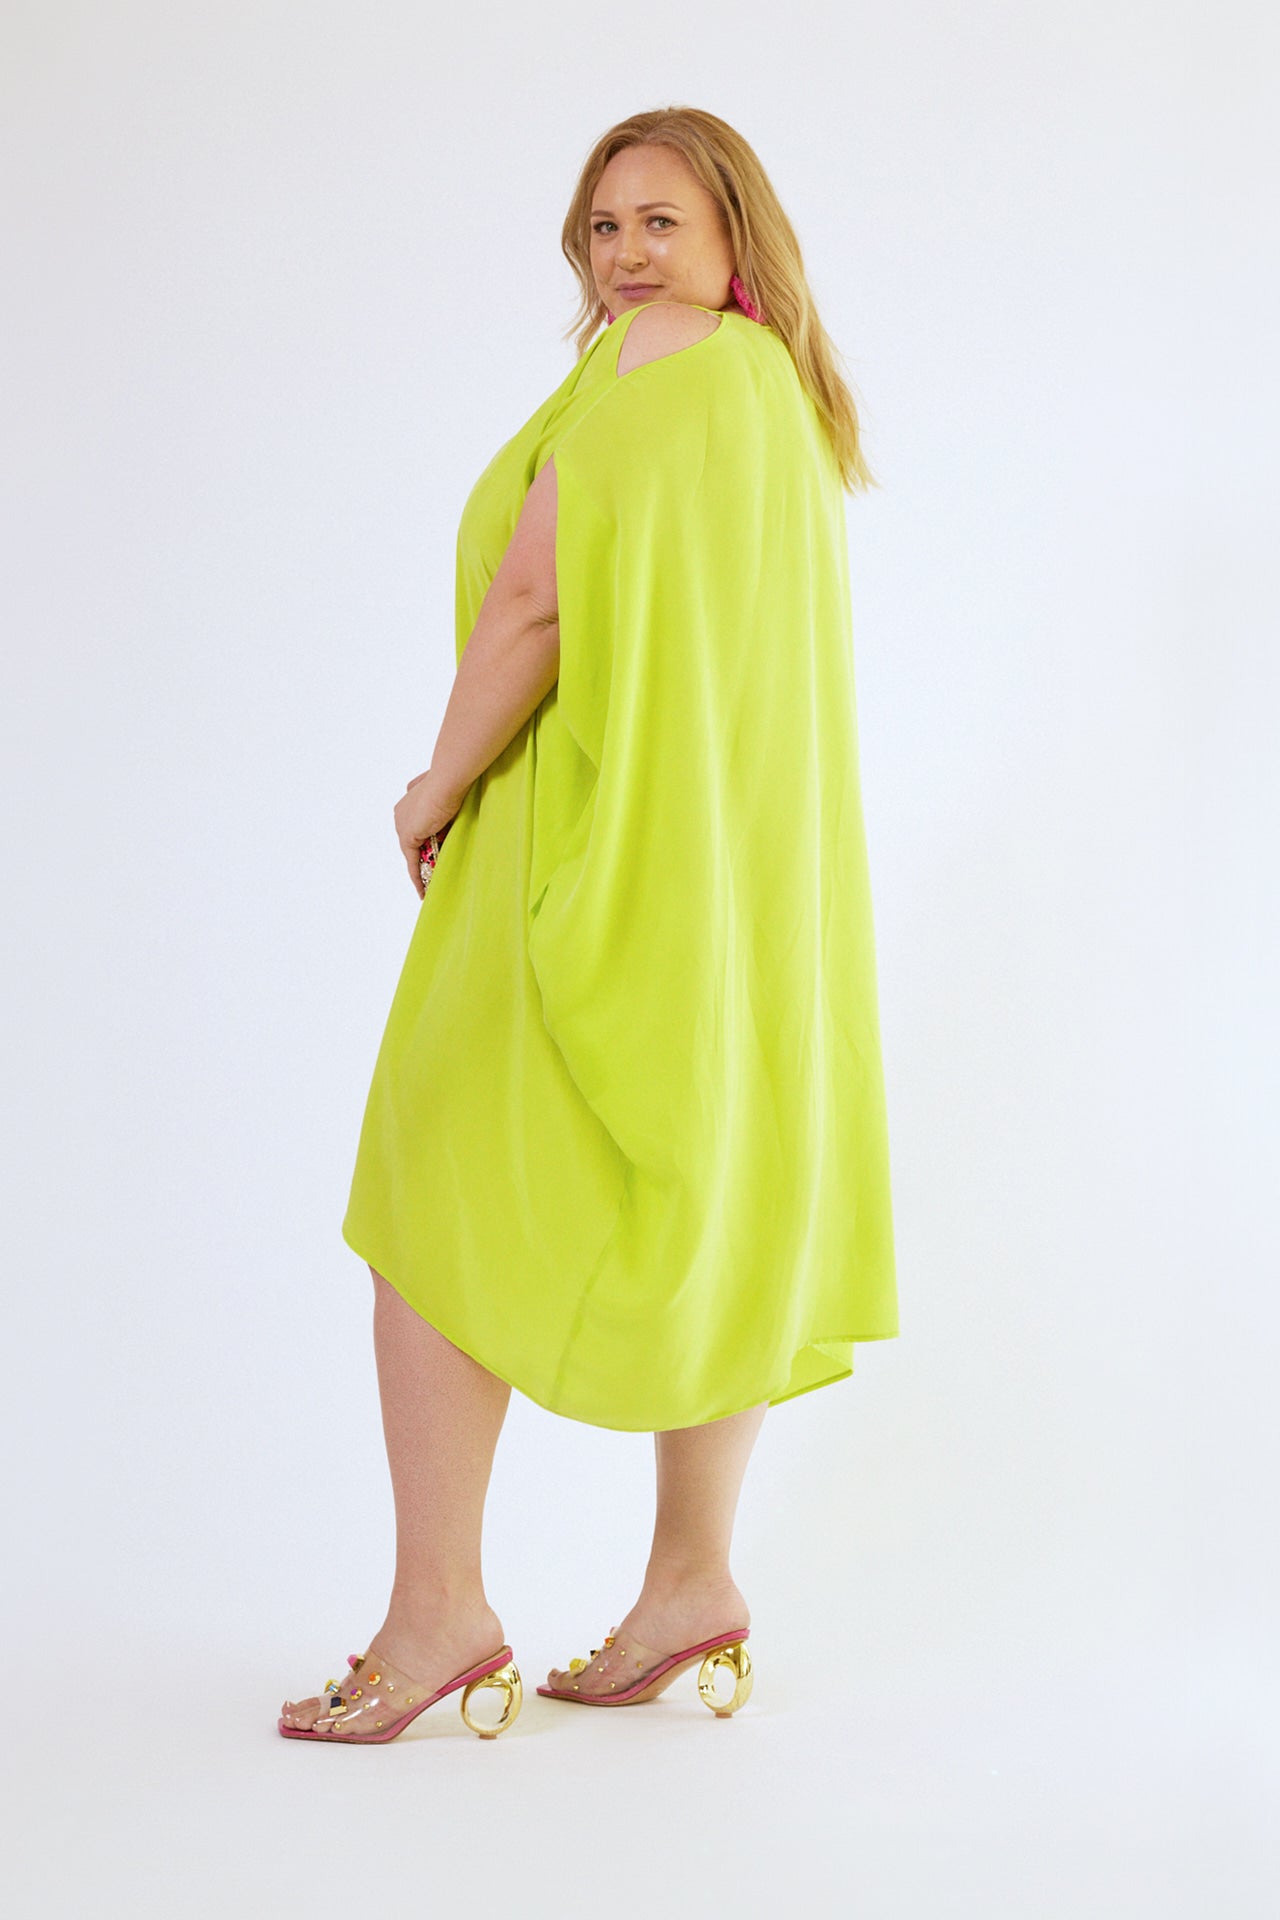 back view of woman wearing bright yellow kaftan duster with front zipper made from recycled materials 4